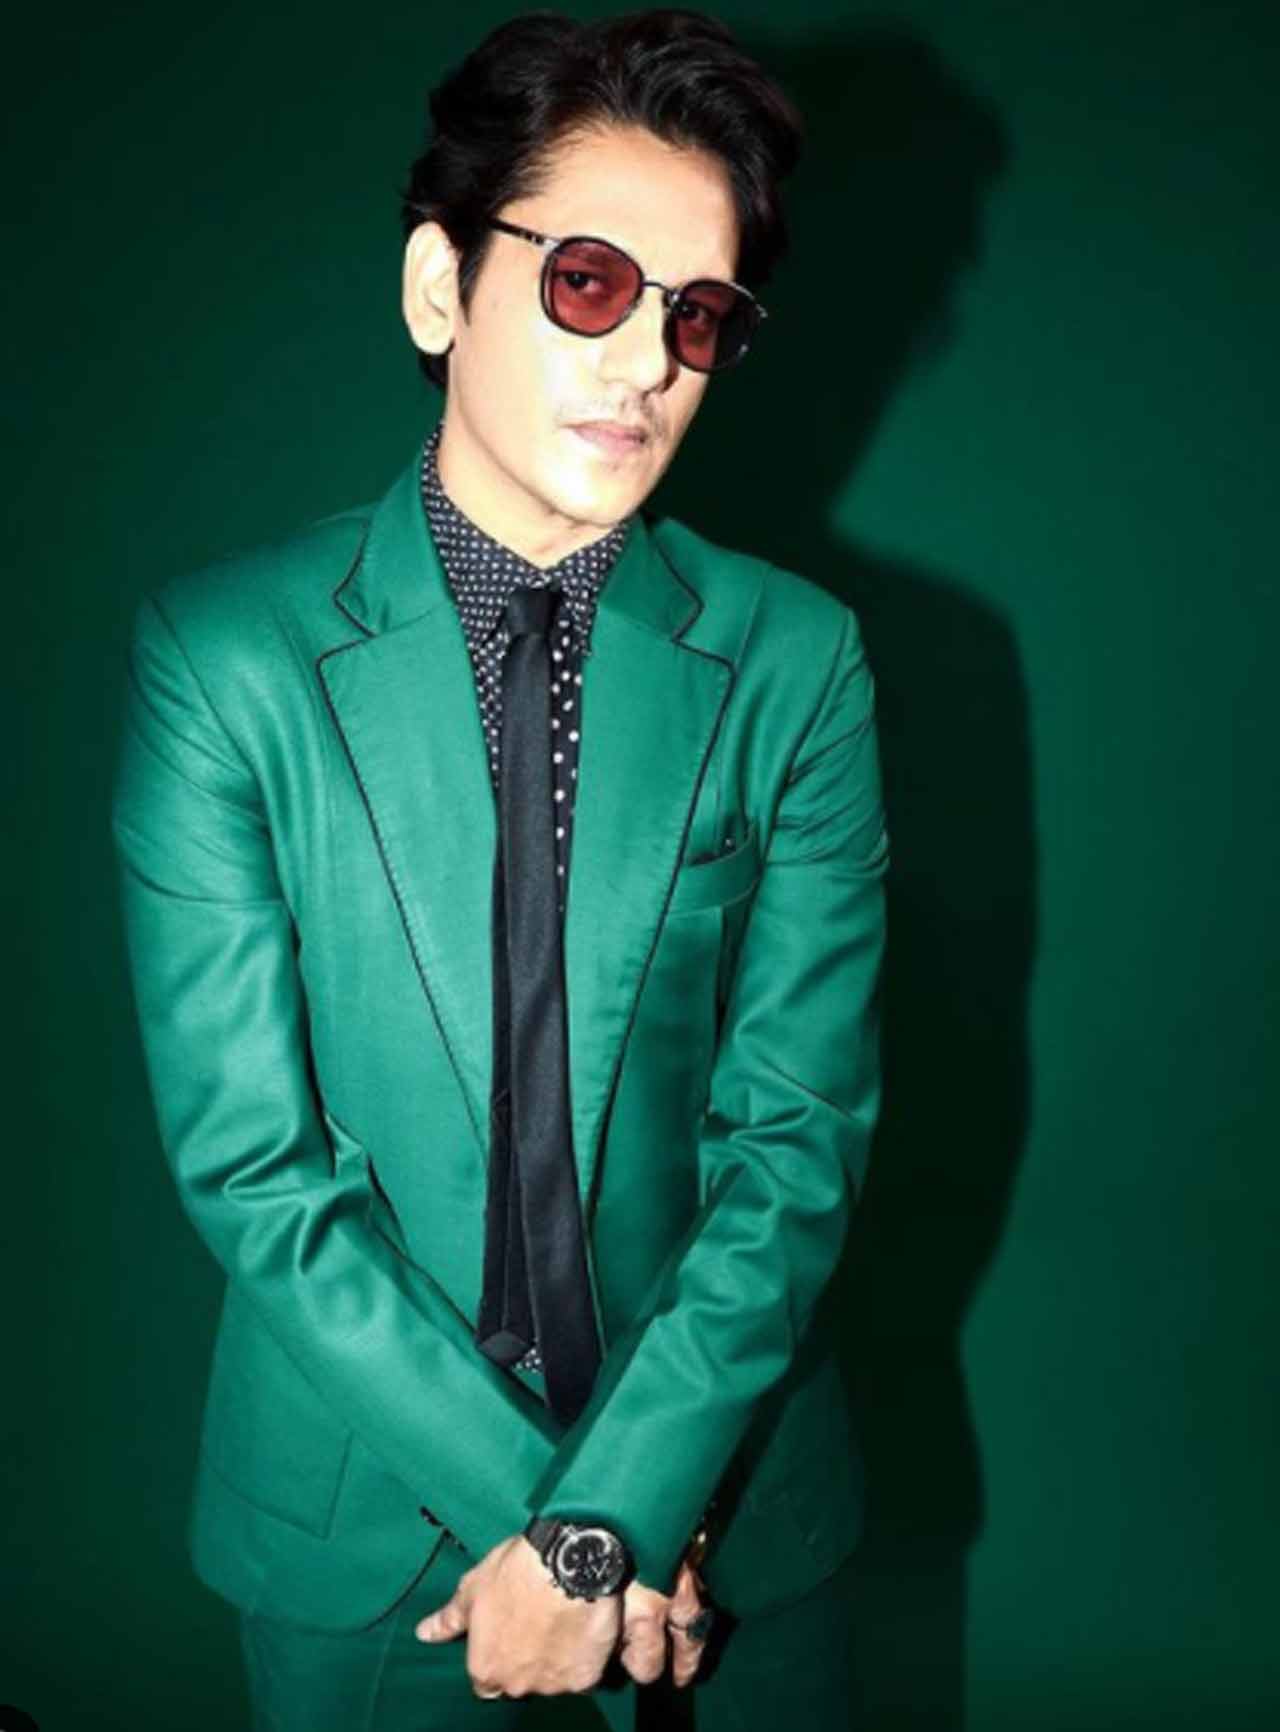 The actor shared this picture with his fans wearing a green coat and posing agasint the background of green wall, making others go green with envy with his style.